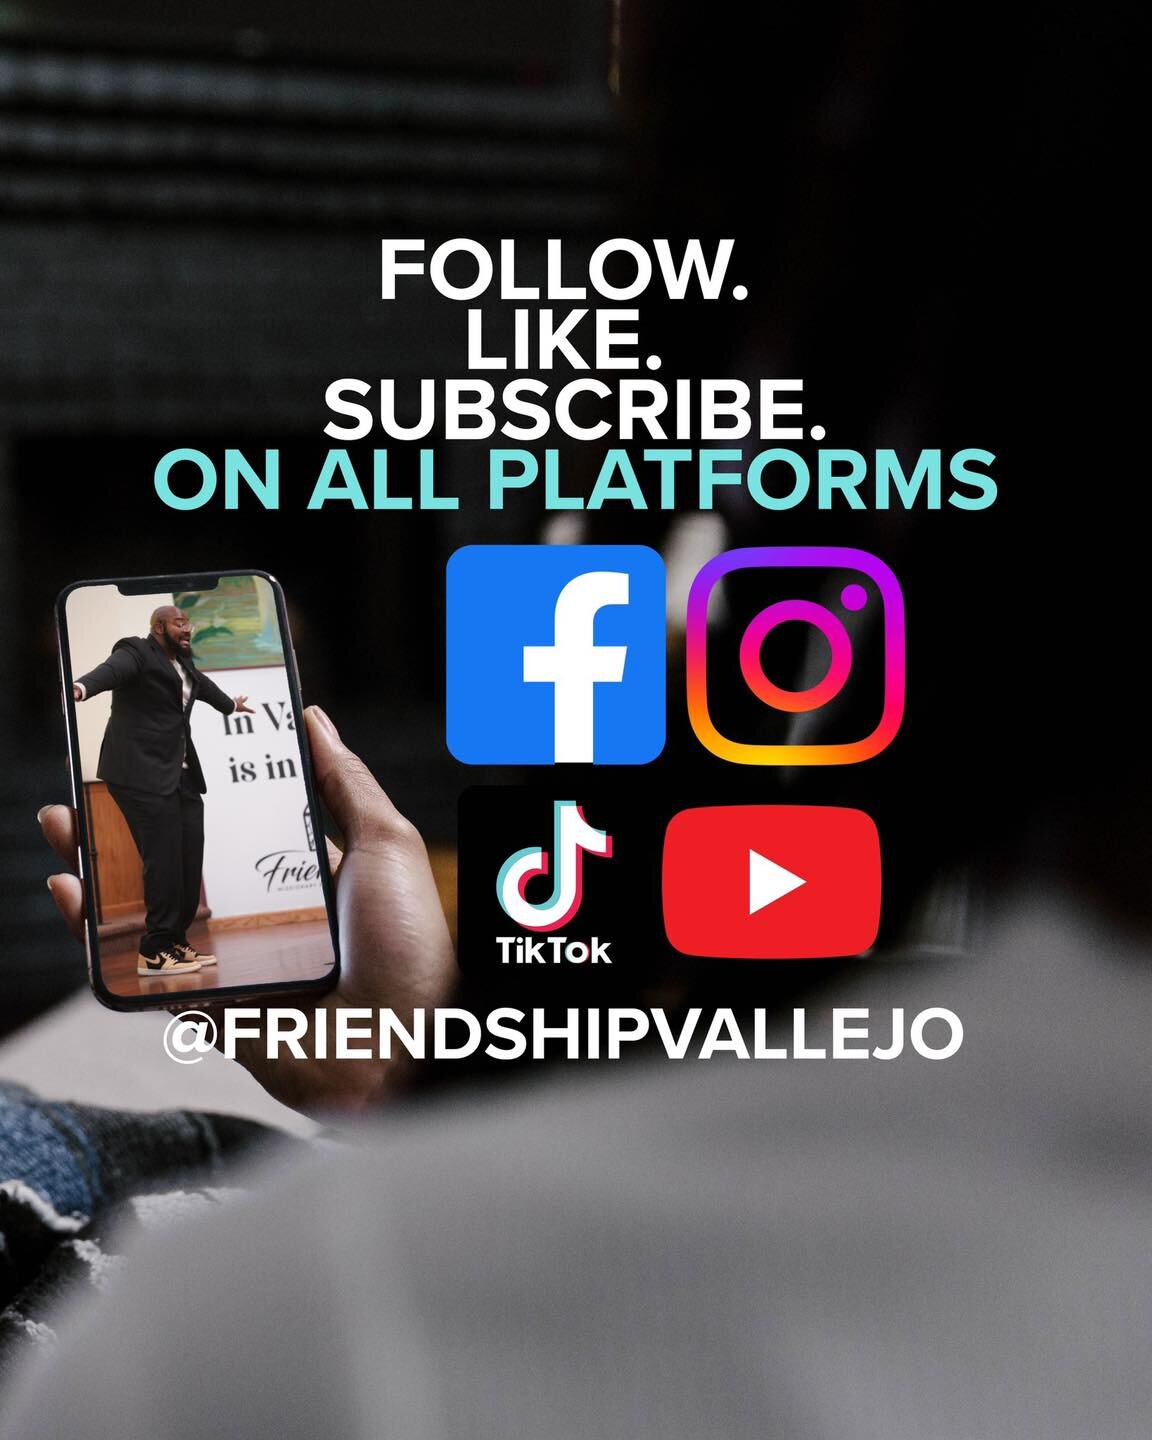 Subscribe to our Youtube Channel. -@FriendshipVallejo
Like our Facebook and Instagram - @FriendshipVallejo
Follow us on TikTok - @FriendshipVallejo
Follow us on Threads - @friendshipvallejo
Join our Text list by Texting - &ldquo;FMBCJoin&rdquo; to 84